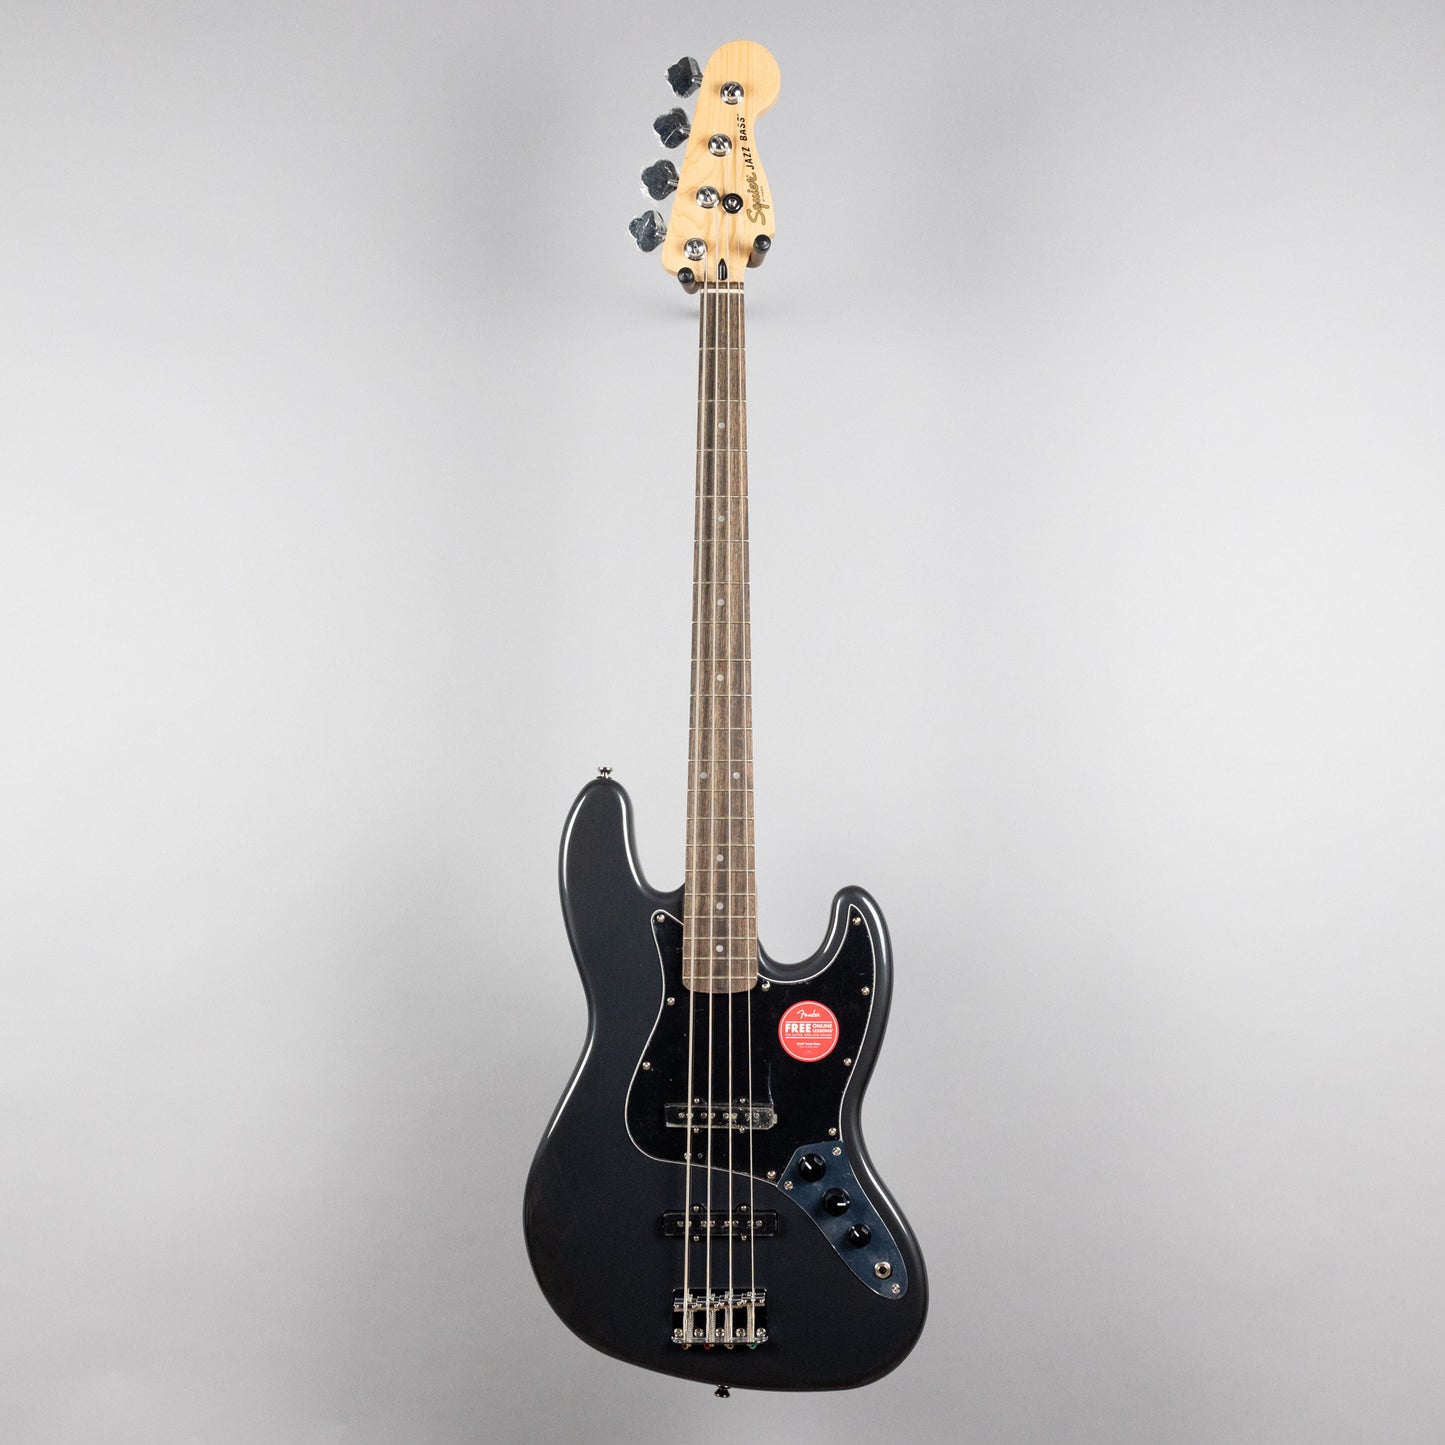 Squier Affinity Series Jazz Bass in Charcoal Frost Metallic